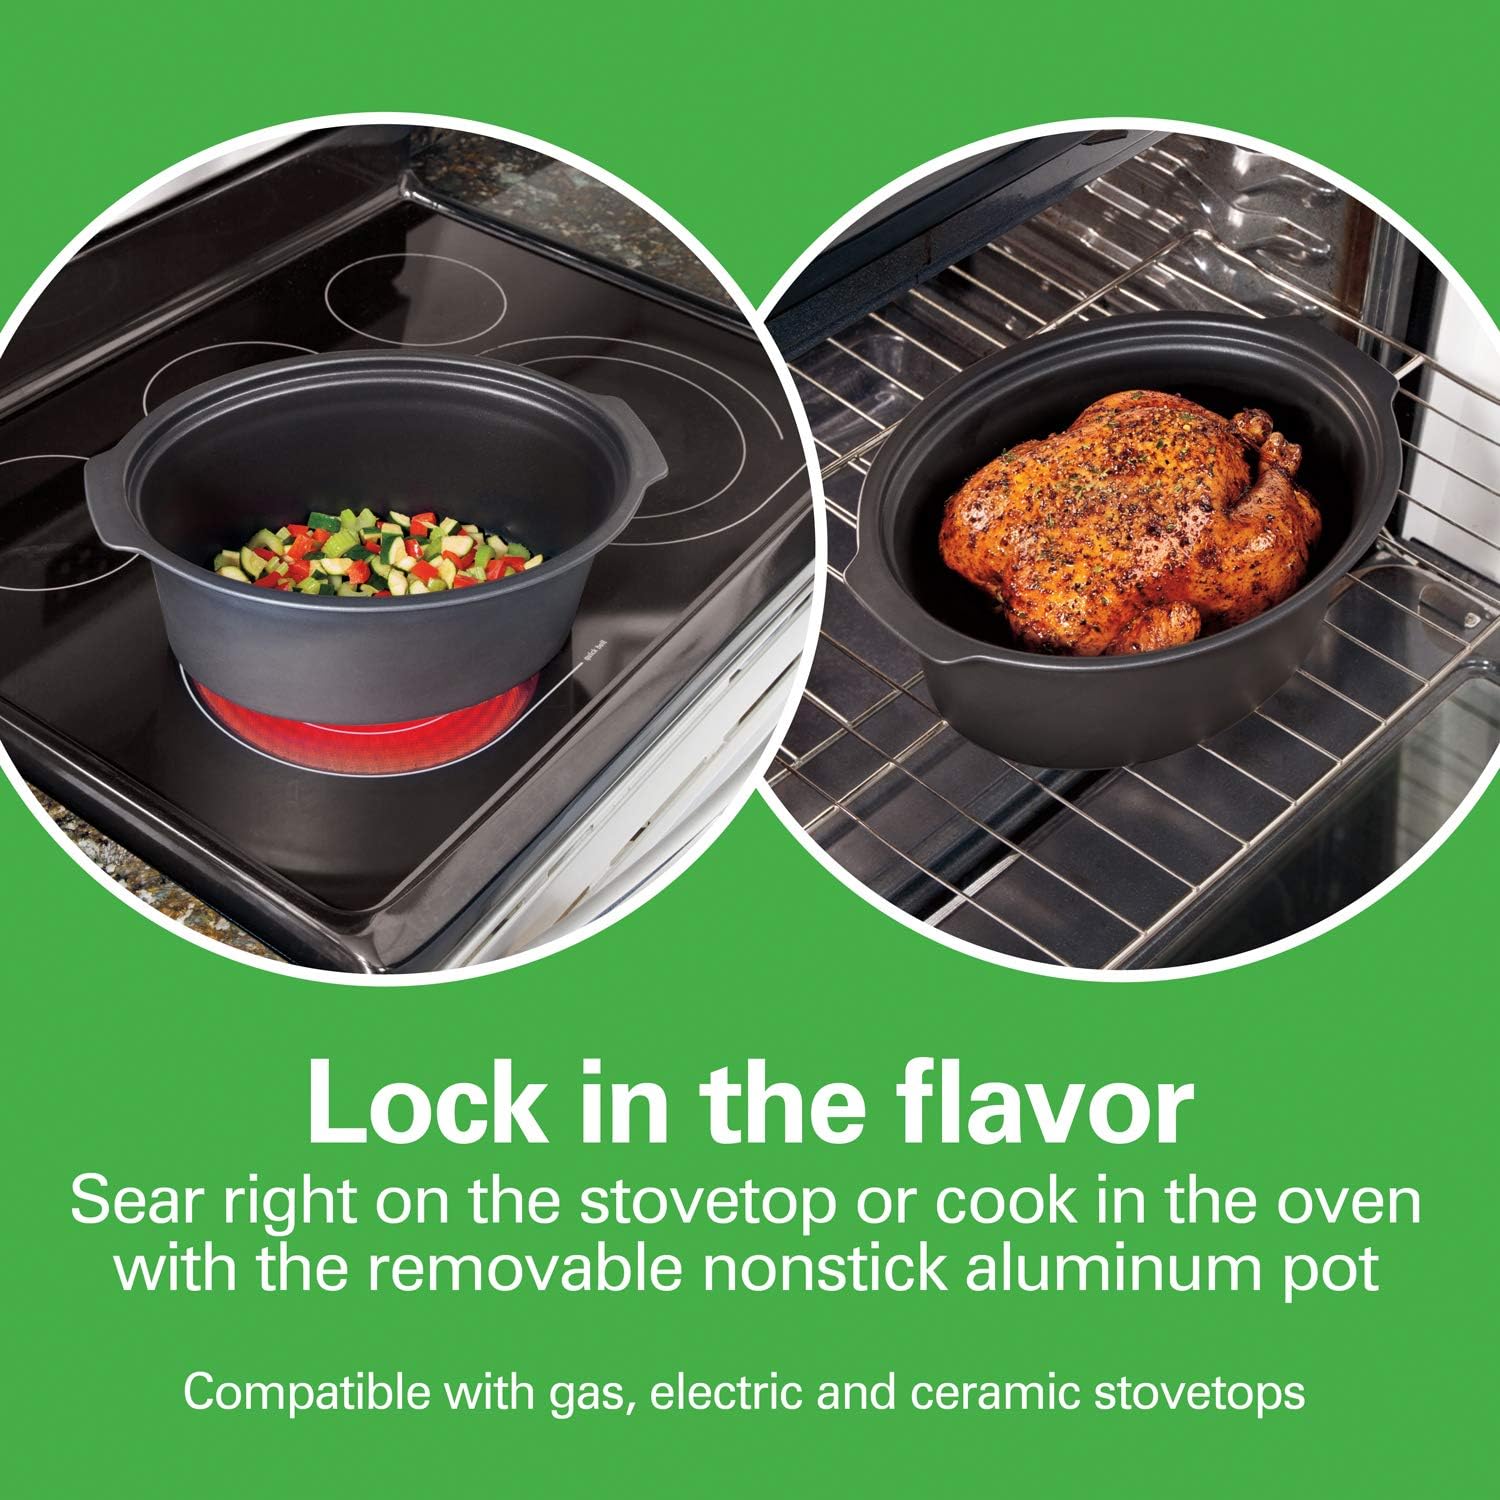 Portable Travel Slow Cooker